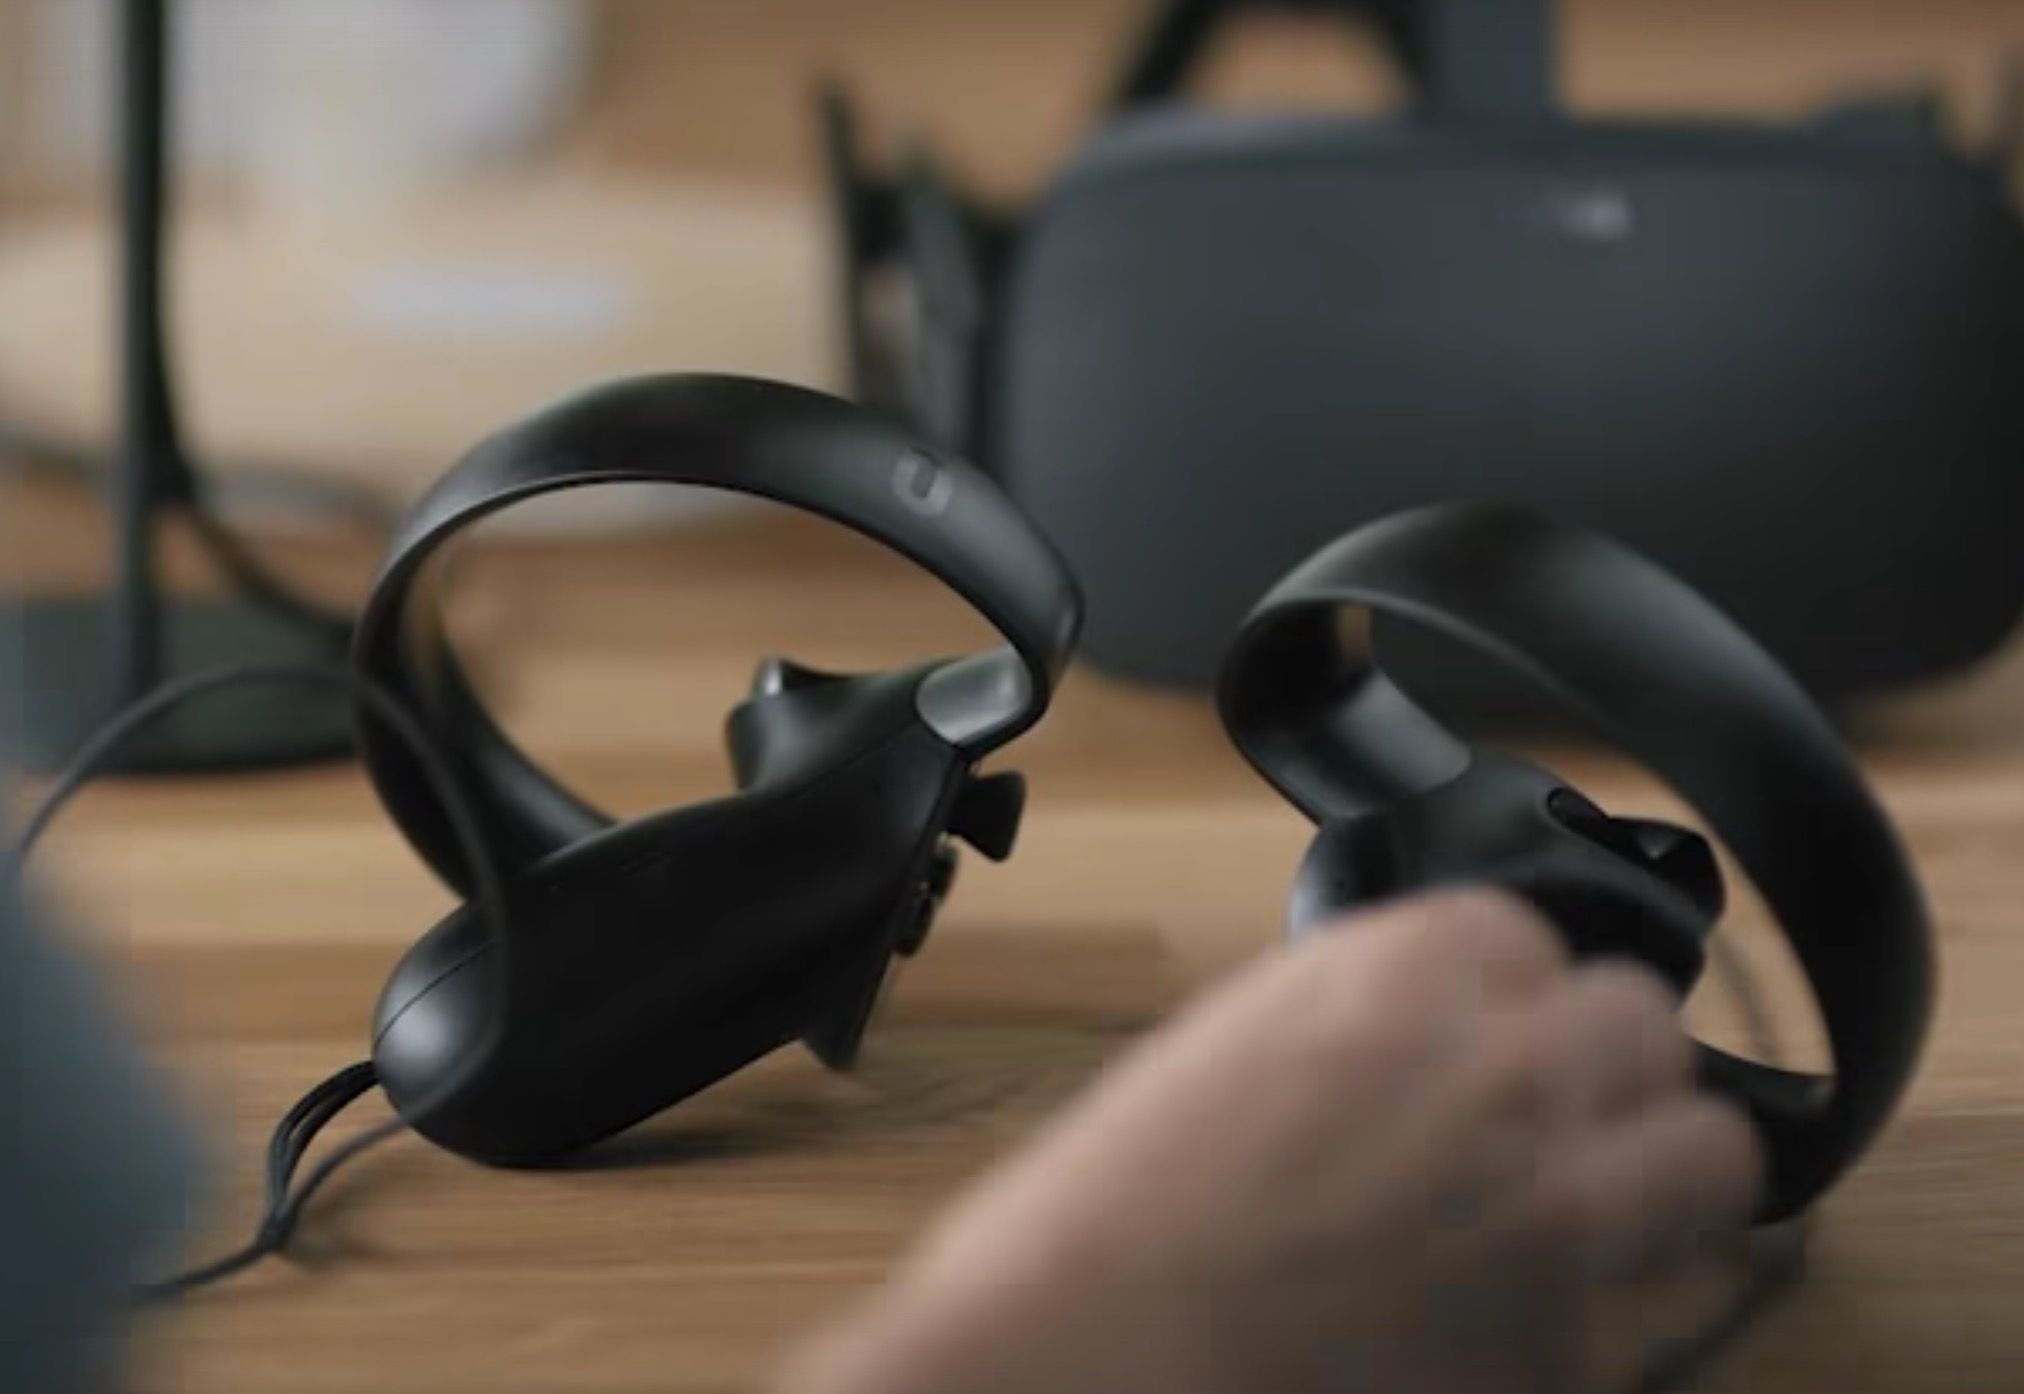 oculus vr opens up pre orders for rift touch controllers image 1